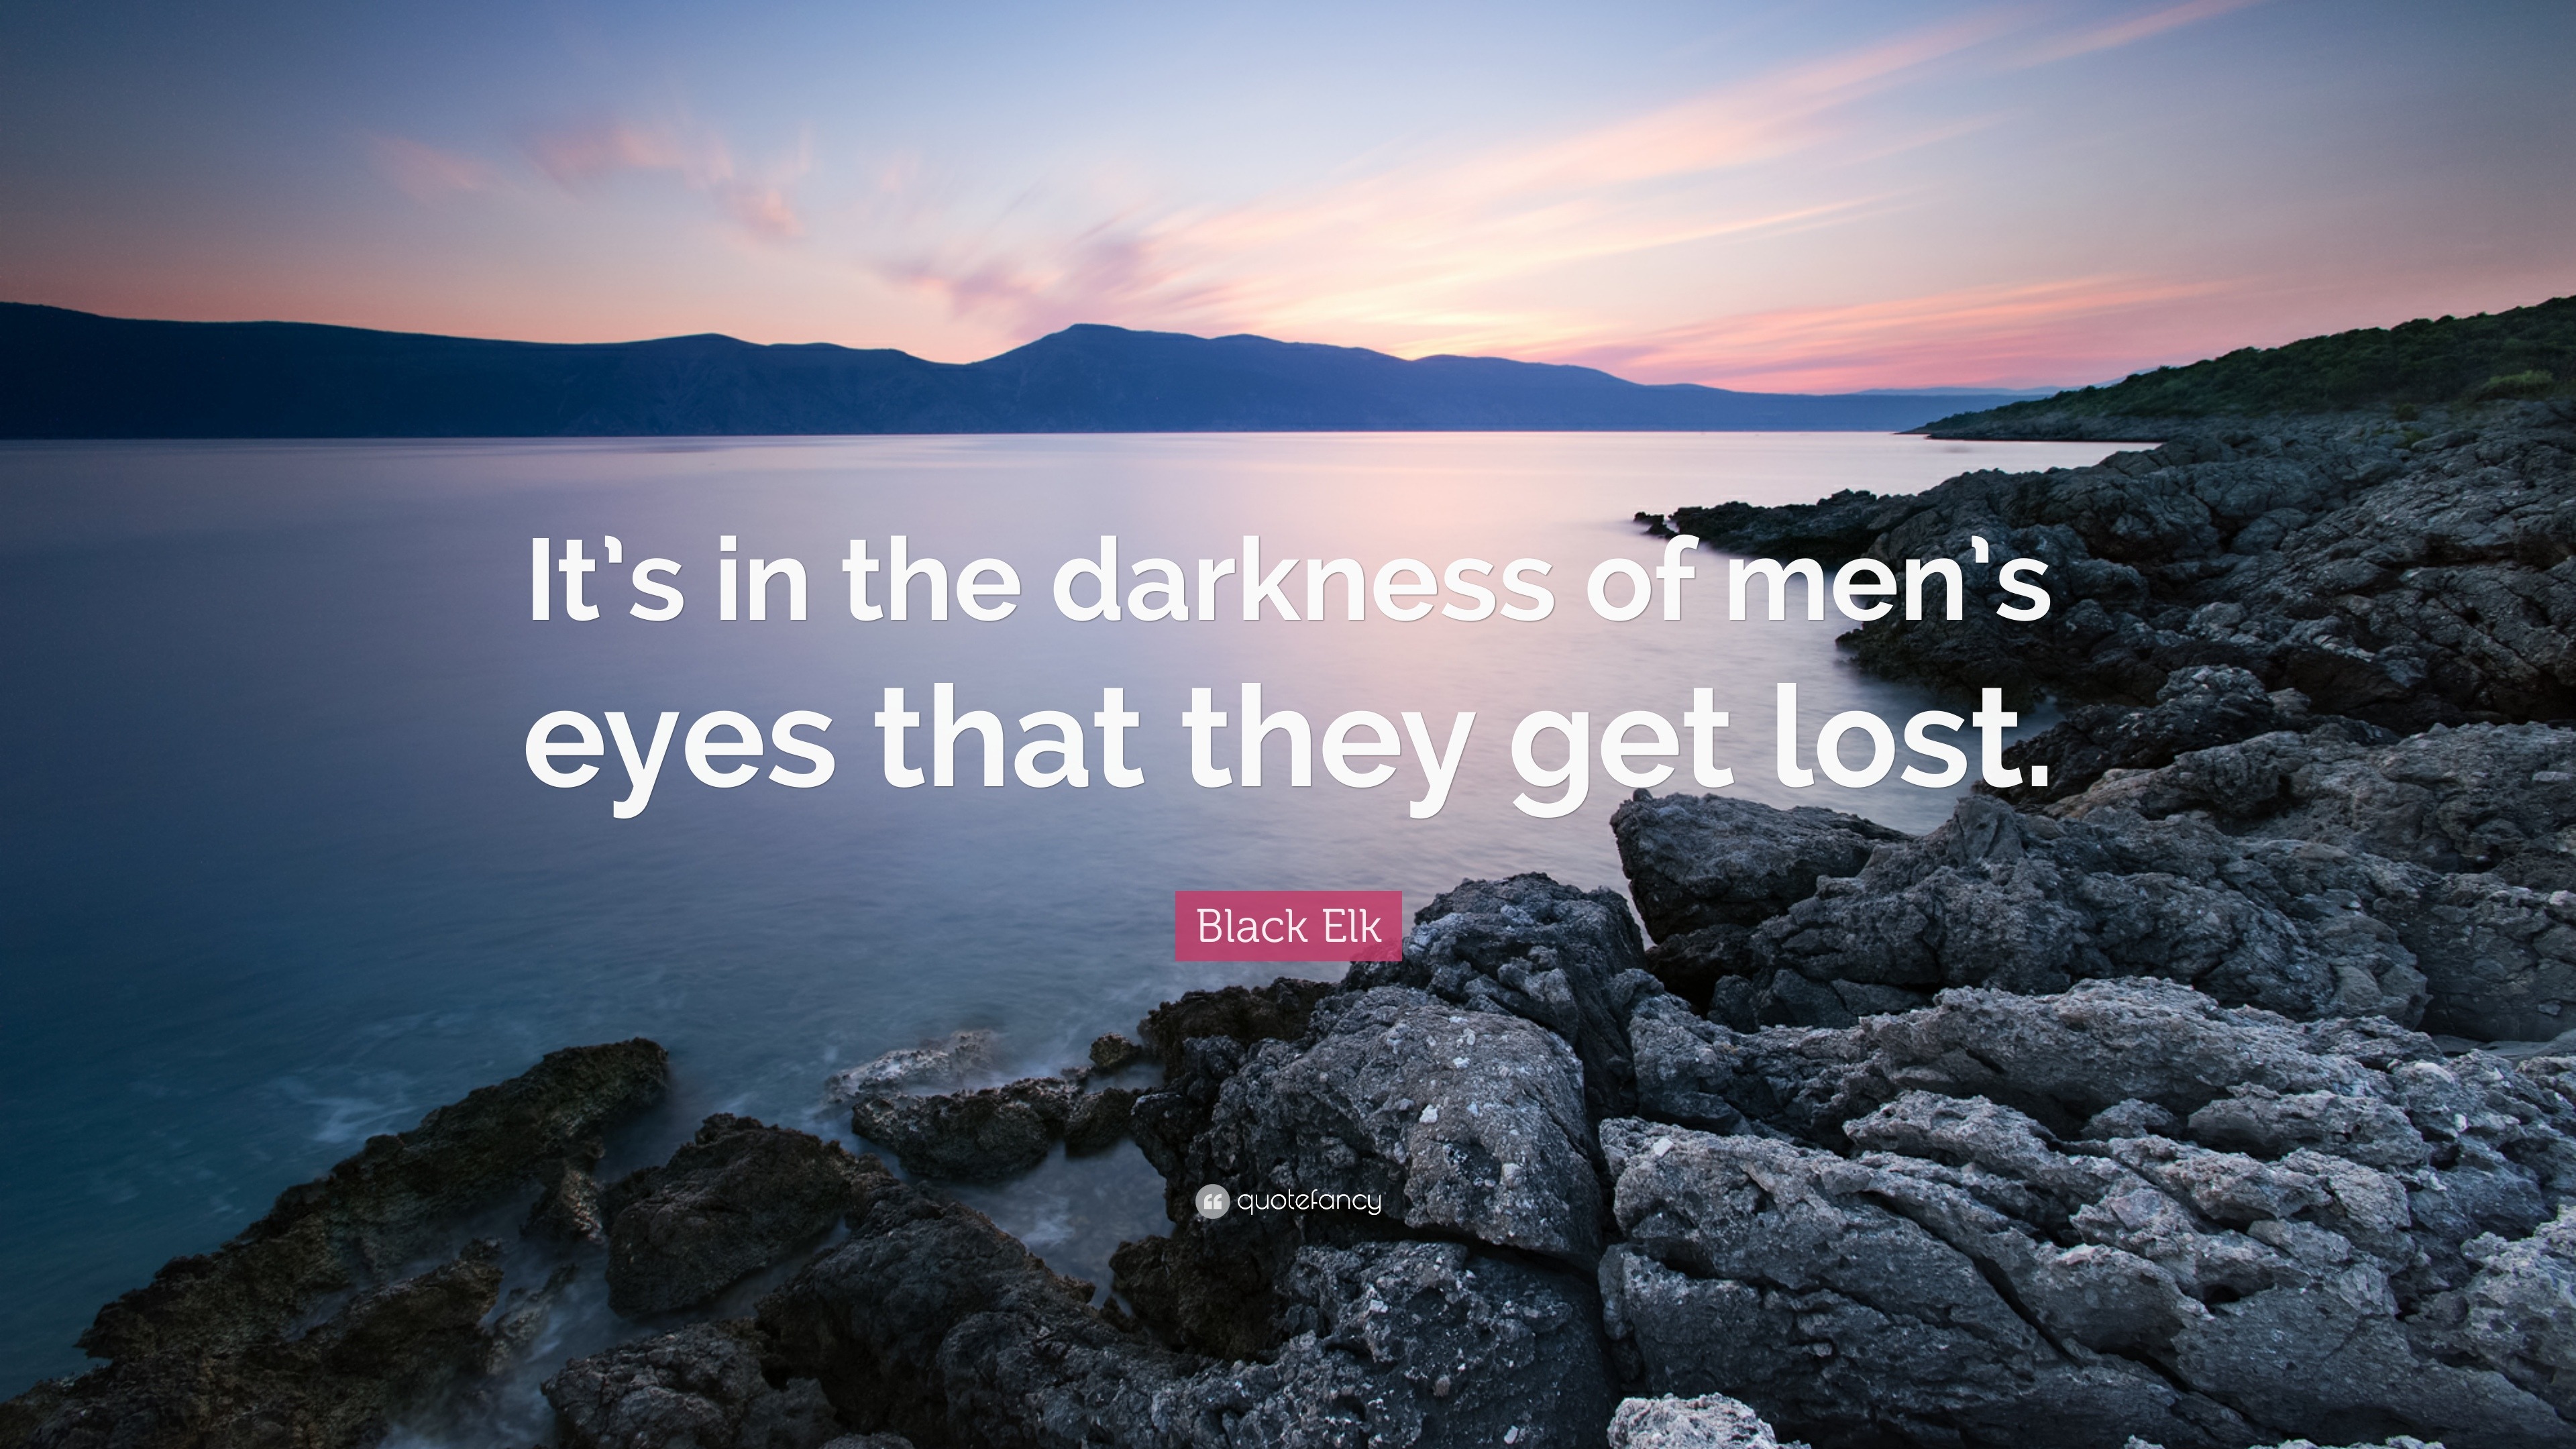 908458-Black-Elk-Quote-It-s-in-the-darkness-of-men-s-eyes-that-they-get.jpg